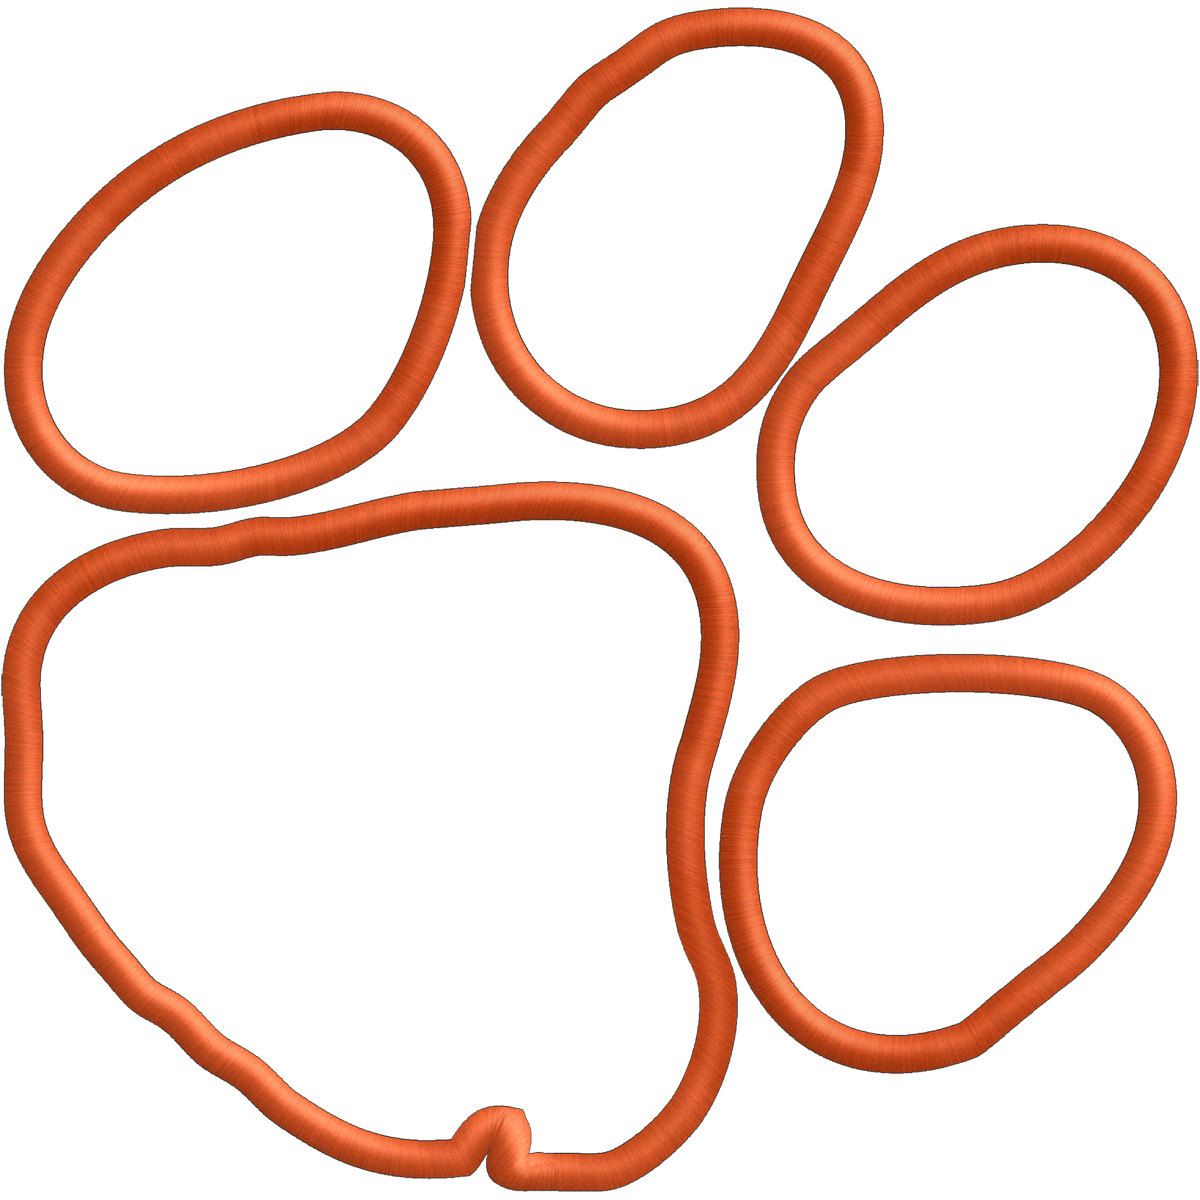 399 Tiger Paw free clipart.